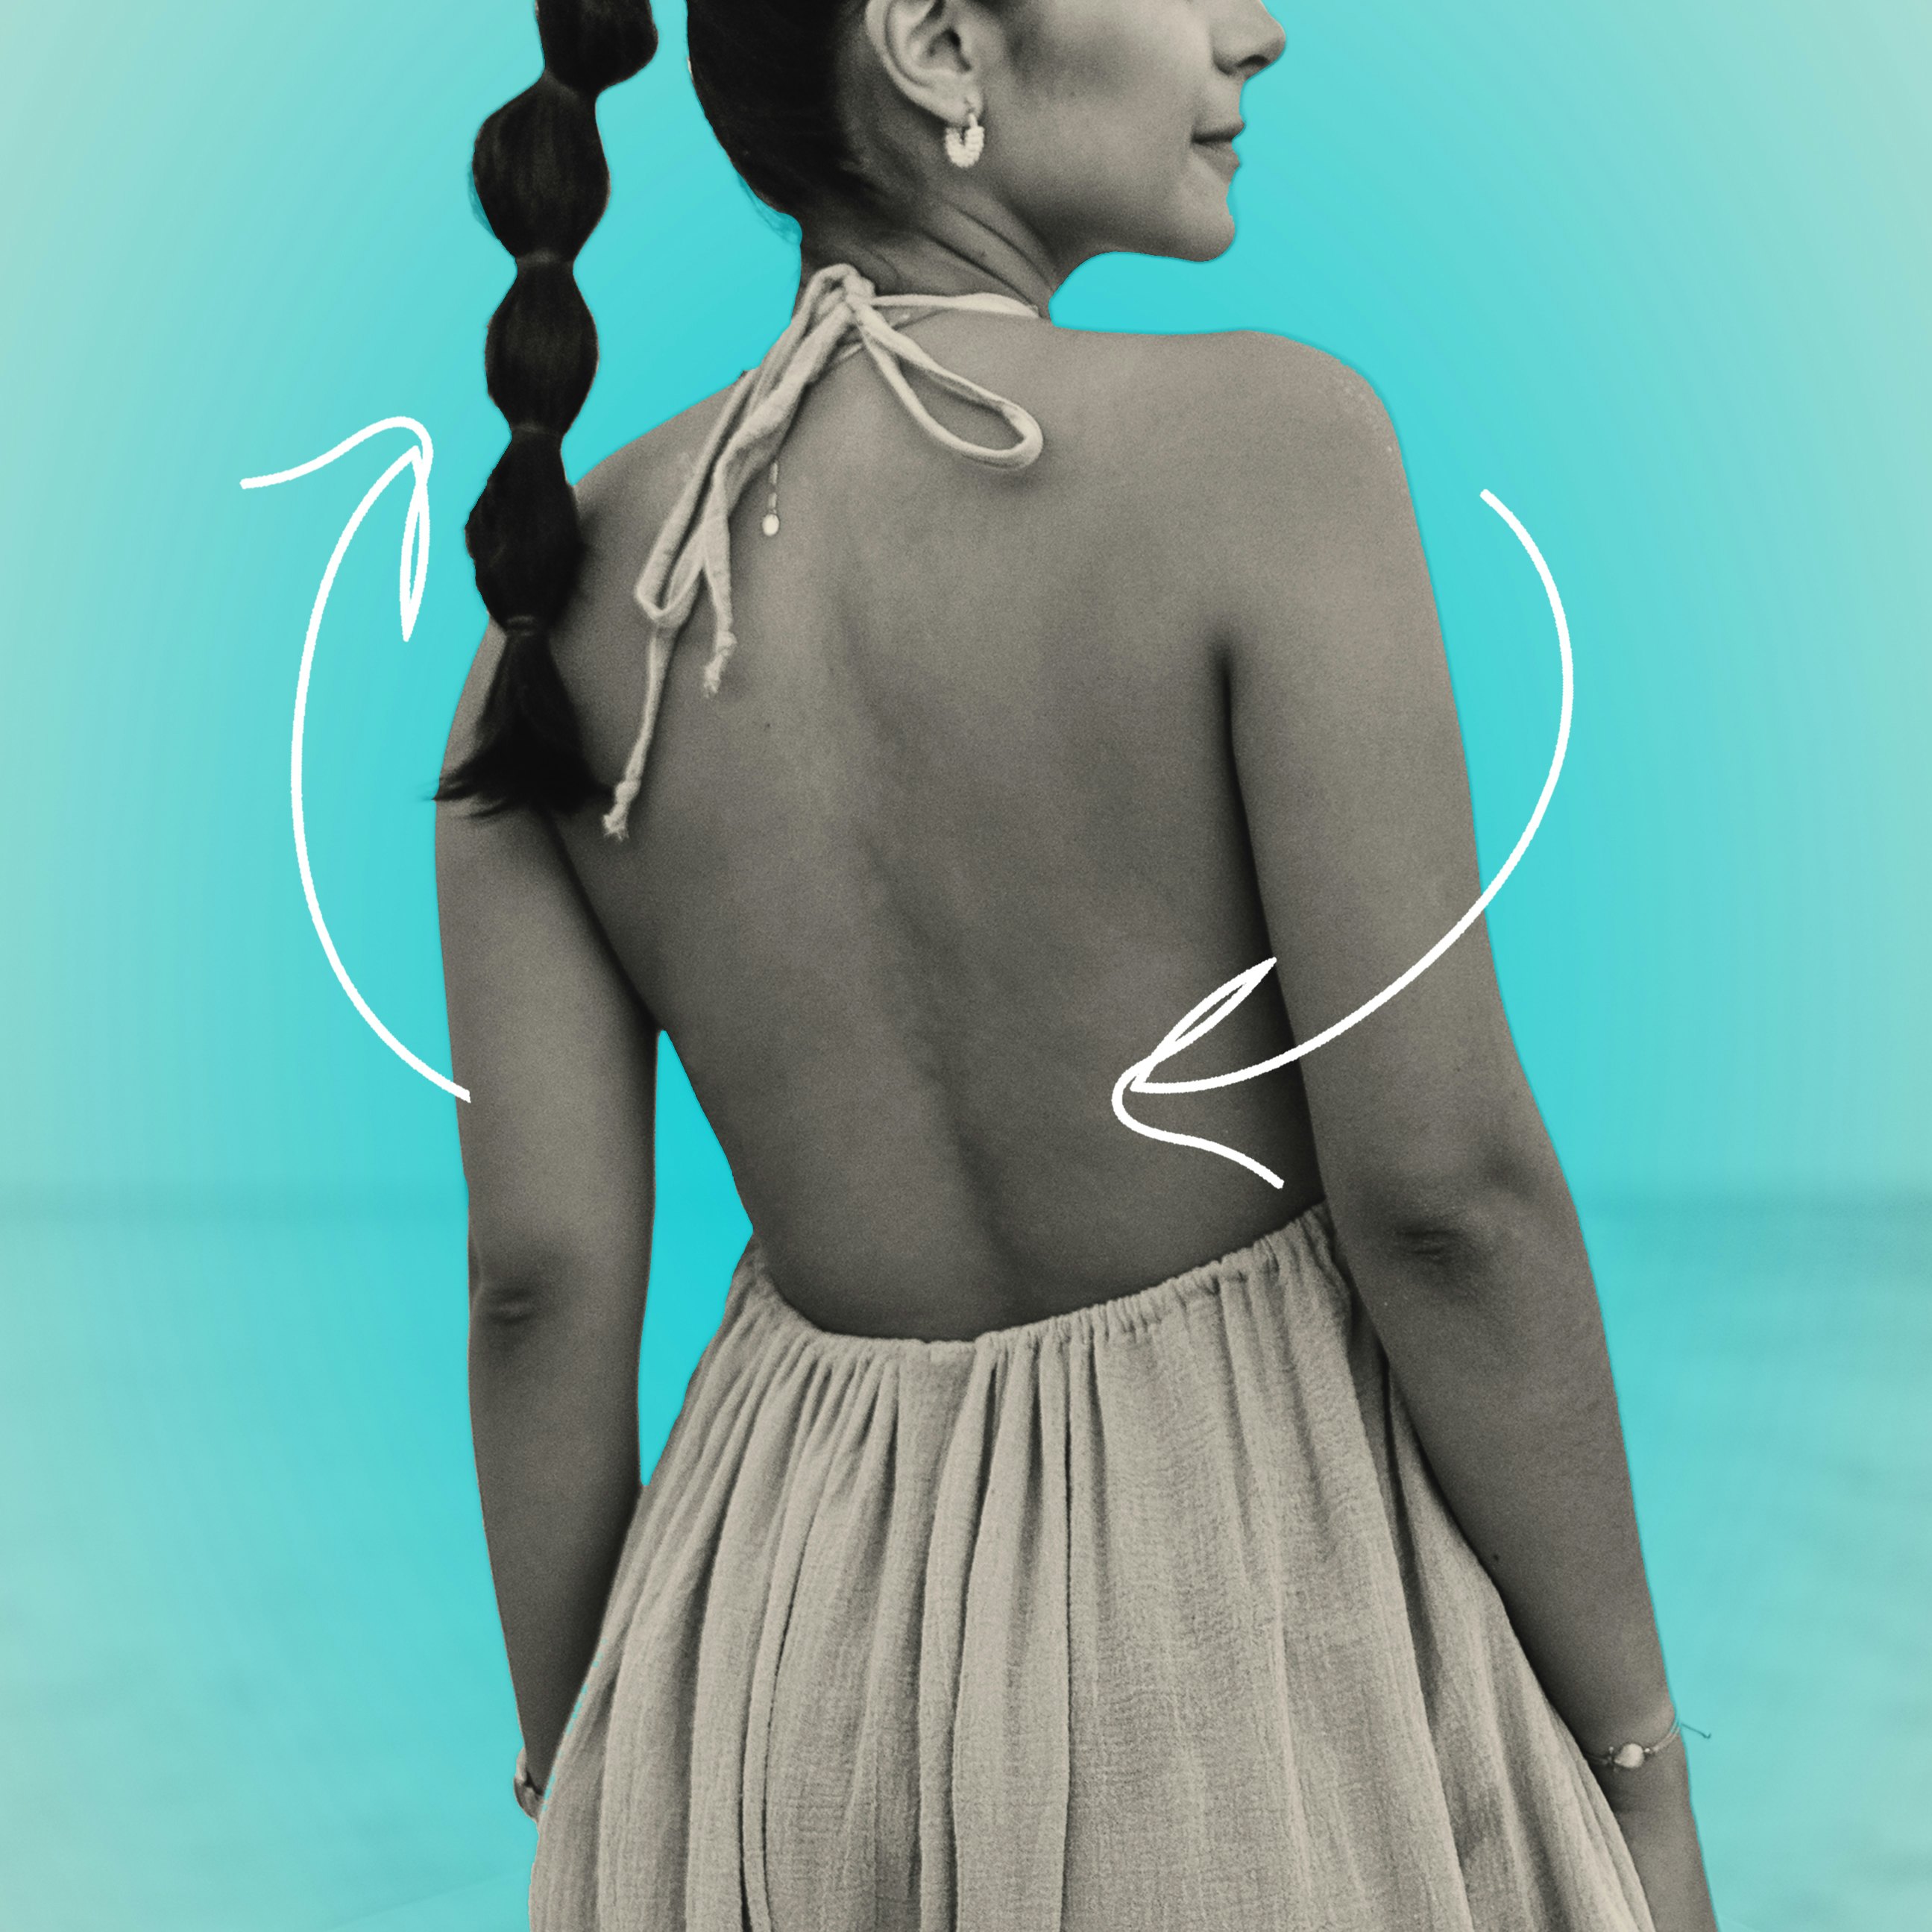 10 Genius Ways To Rock A Backless Dress With Big Boobs